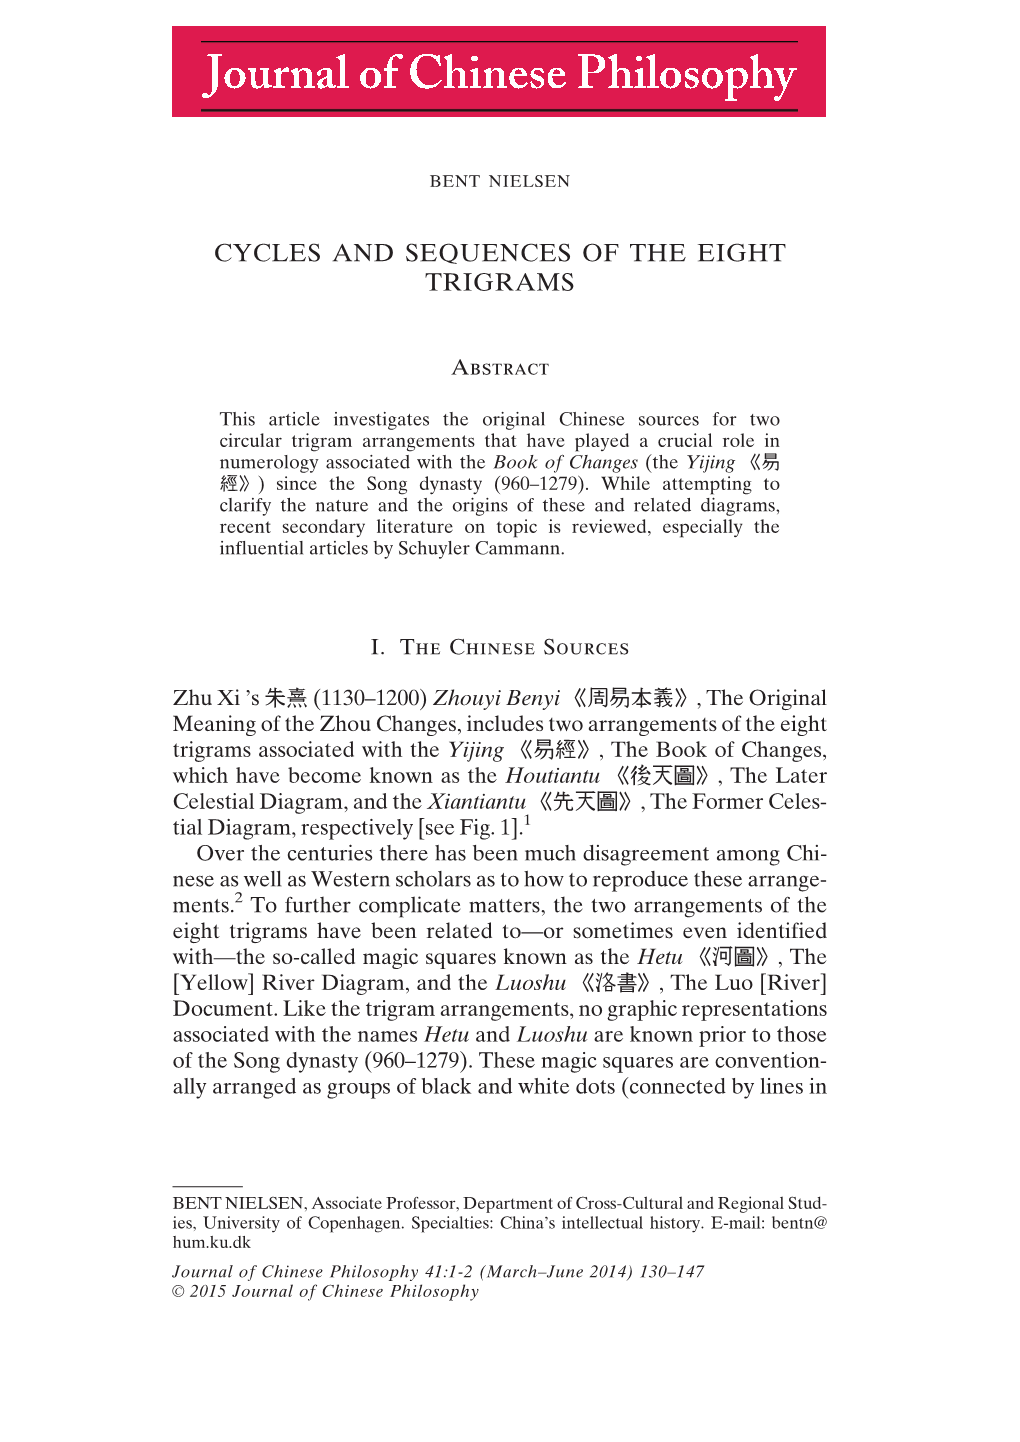 Cycles and Sequences of the Eight Trigrams